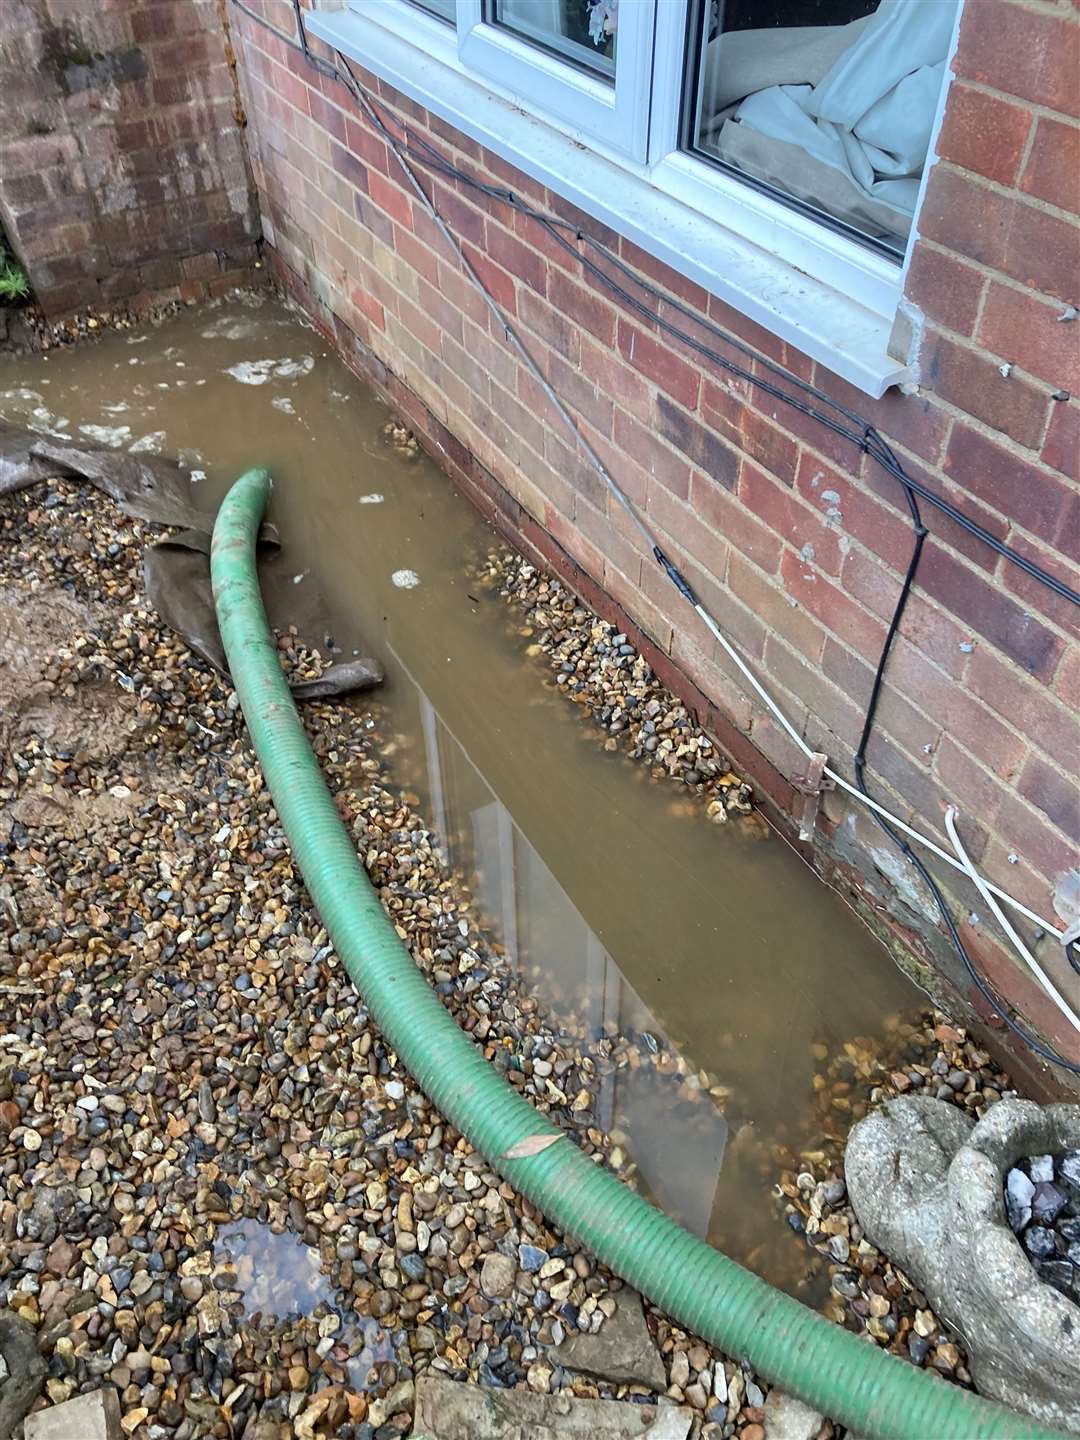 Mr Palmer has a submersible pump at his Tuddenham St Mary home to redirect water to nearby drains. Picture: Shaun Palmer